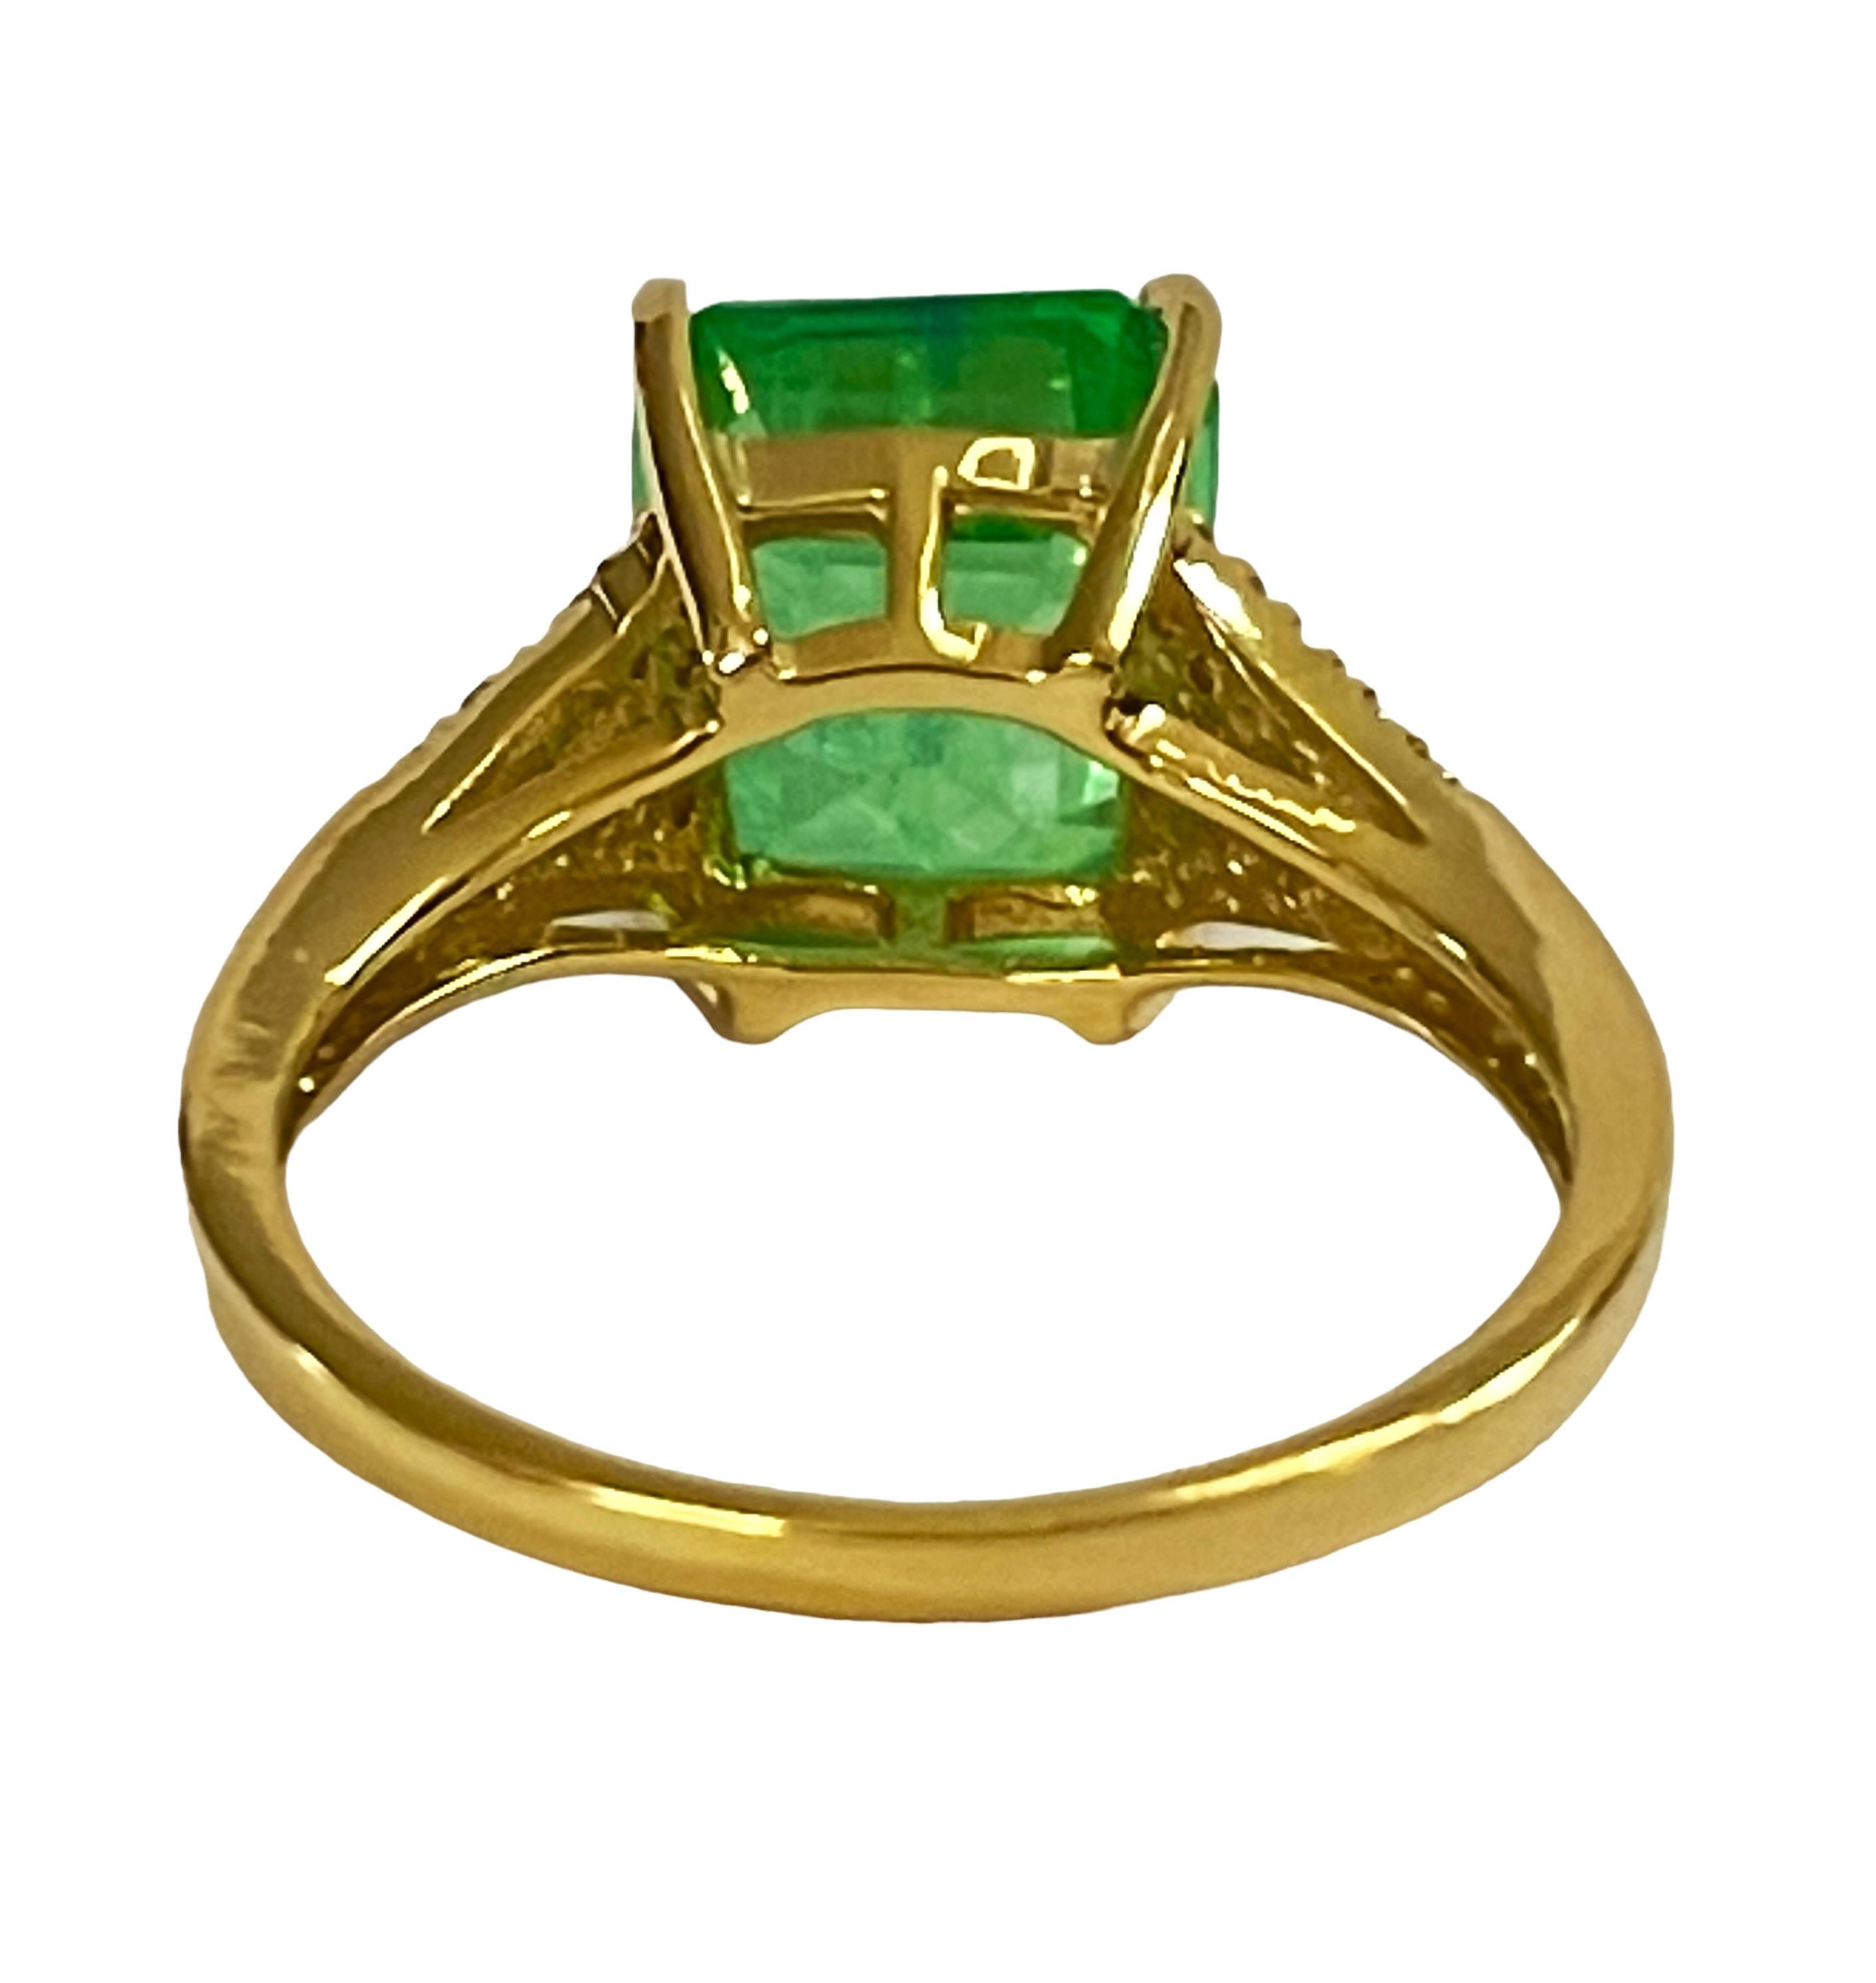 Oval Cut New African 5.40 Carat Emerald Green Garnet Sapphire YGold Sterling Ring